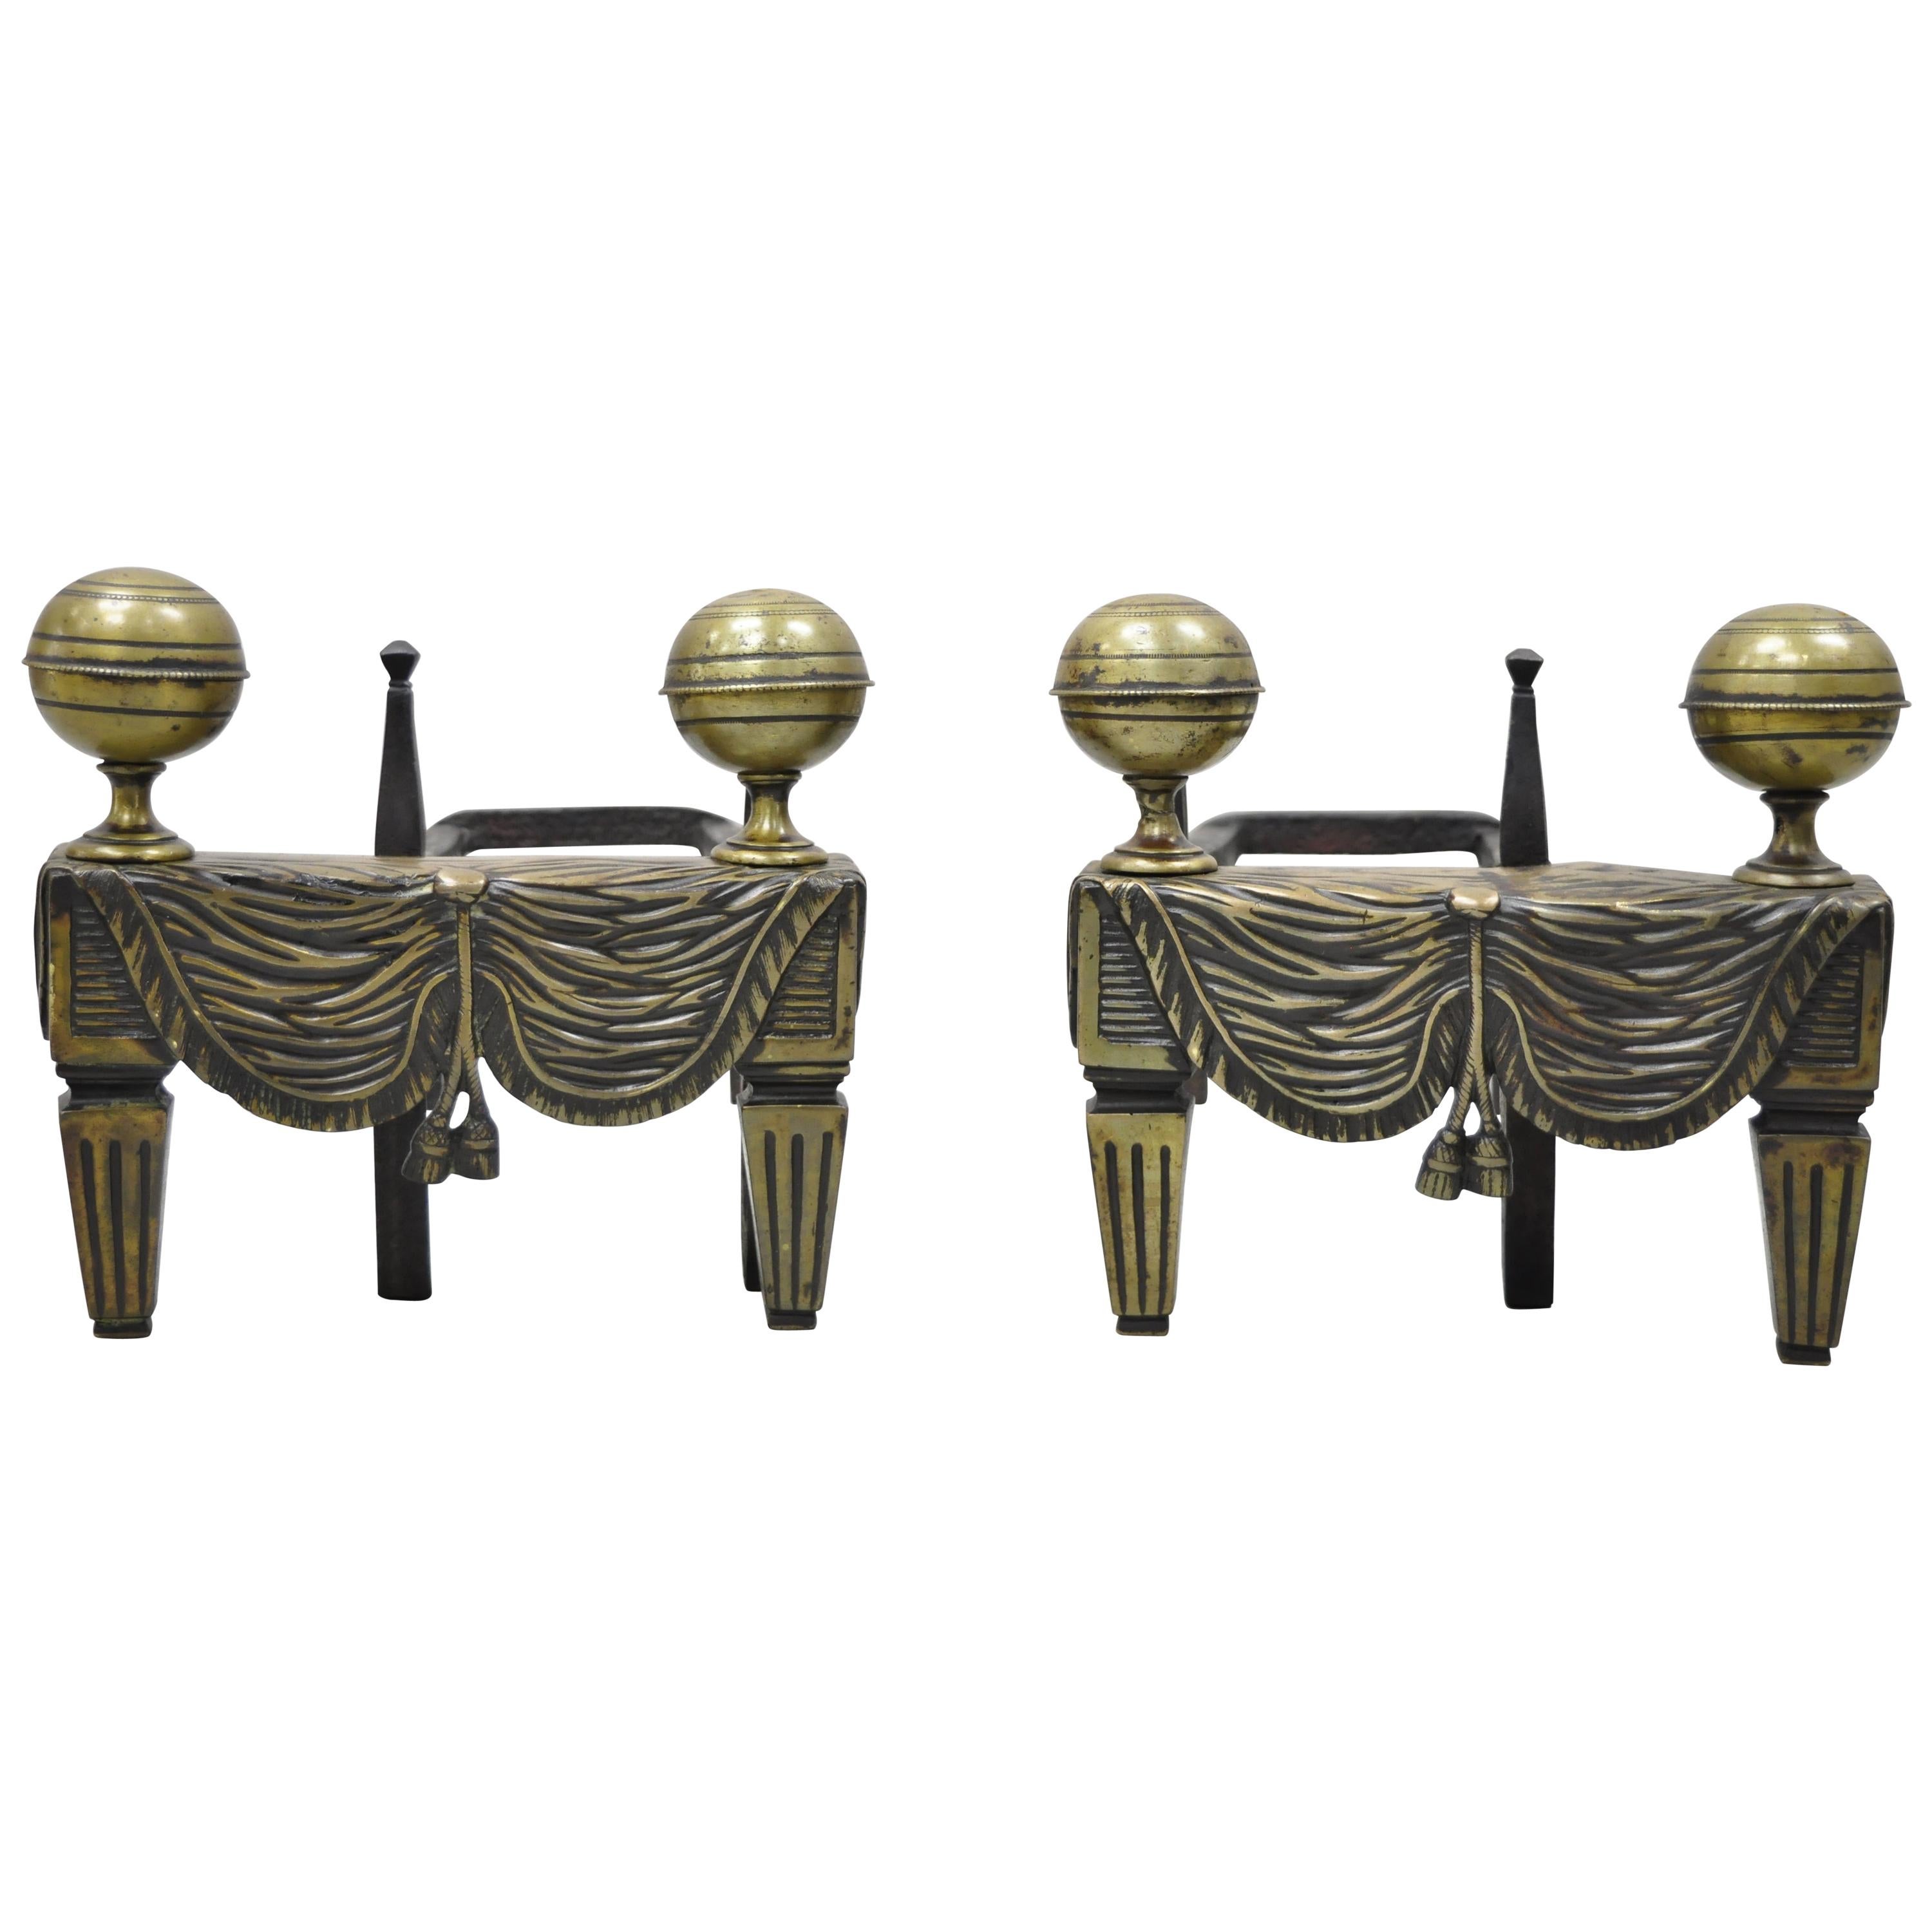 French Empire Bronze Drape & Tassel Cannonball Chenet Small Andirons, a Pair